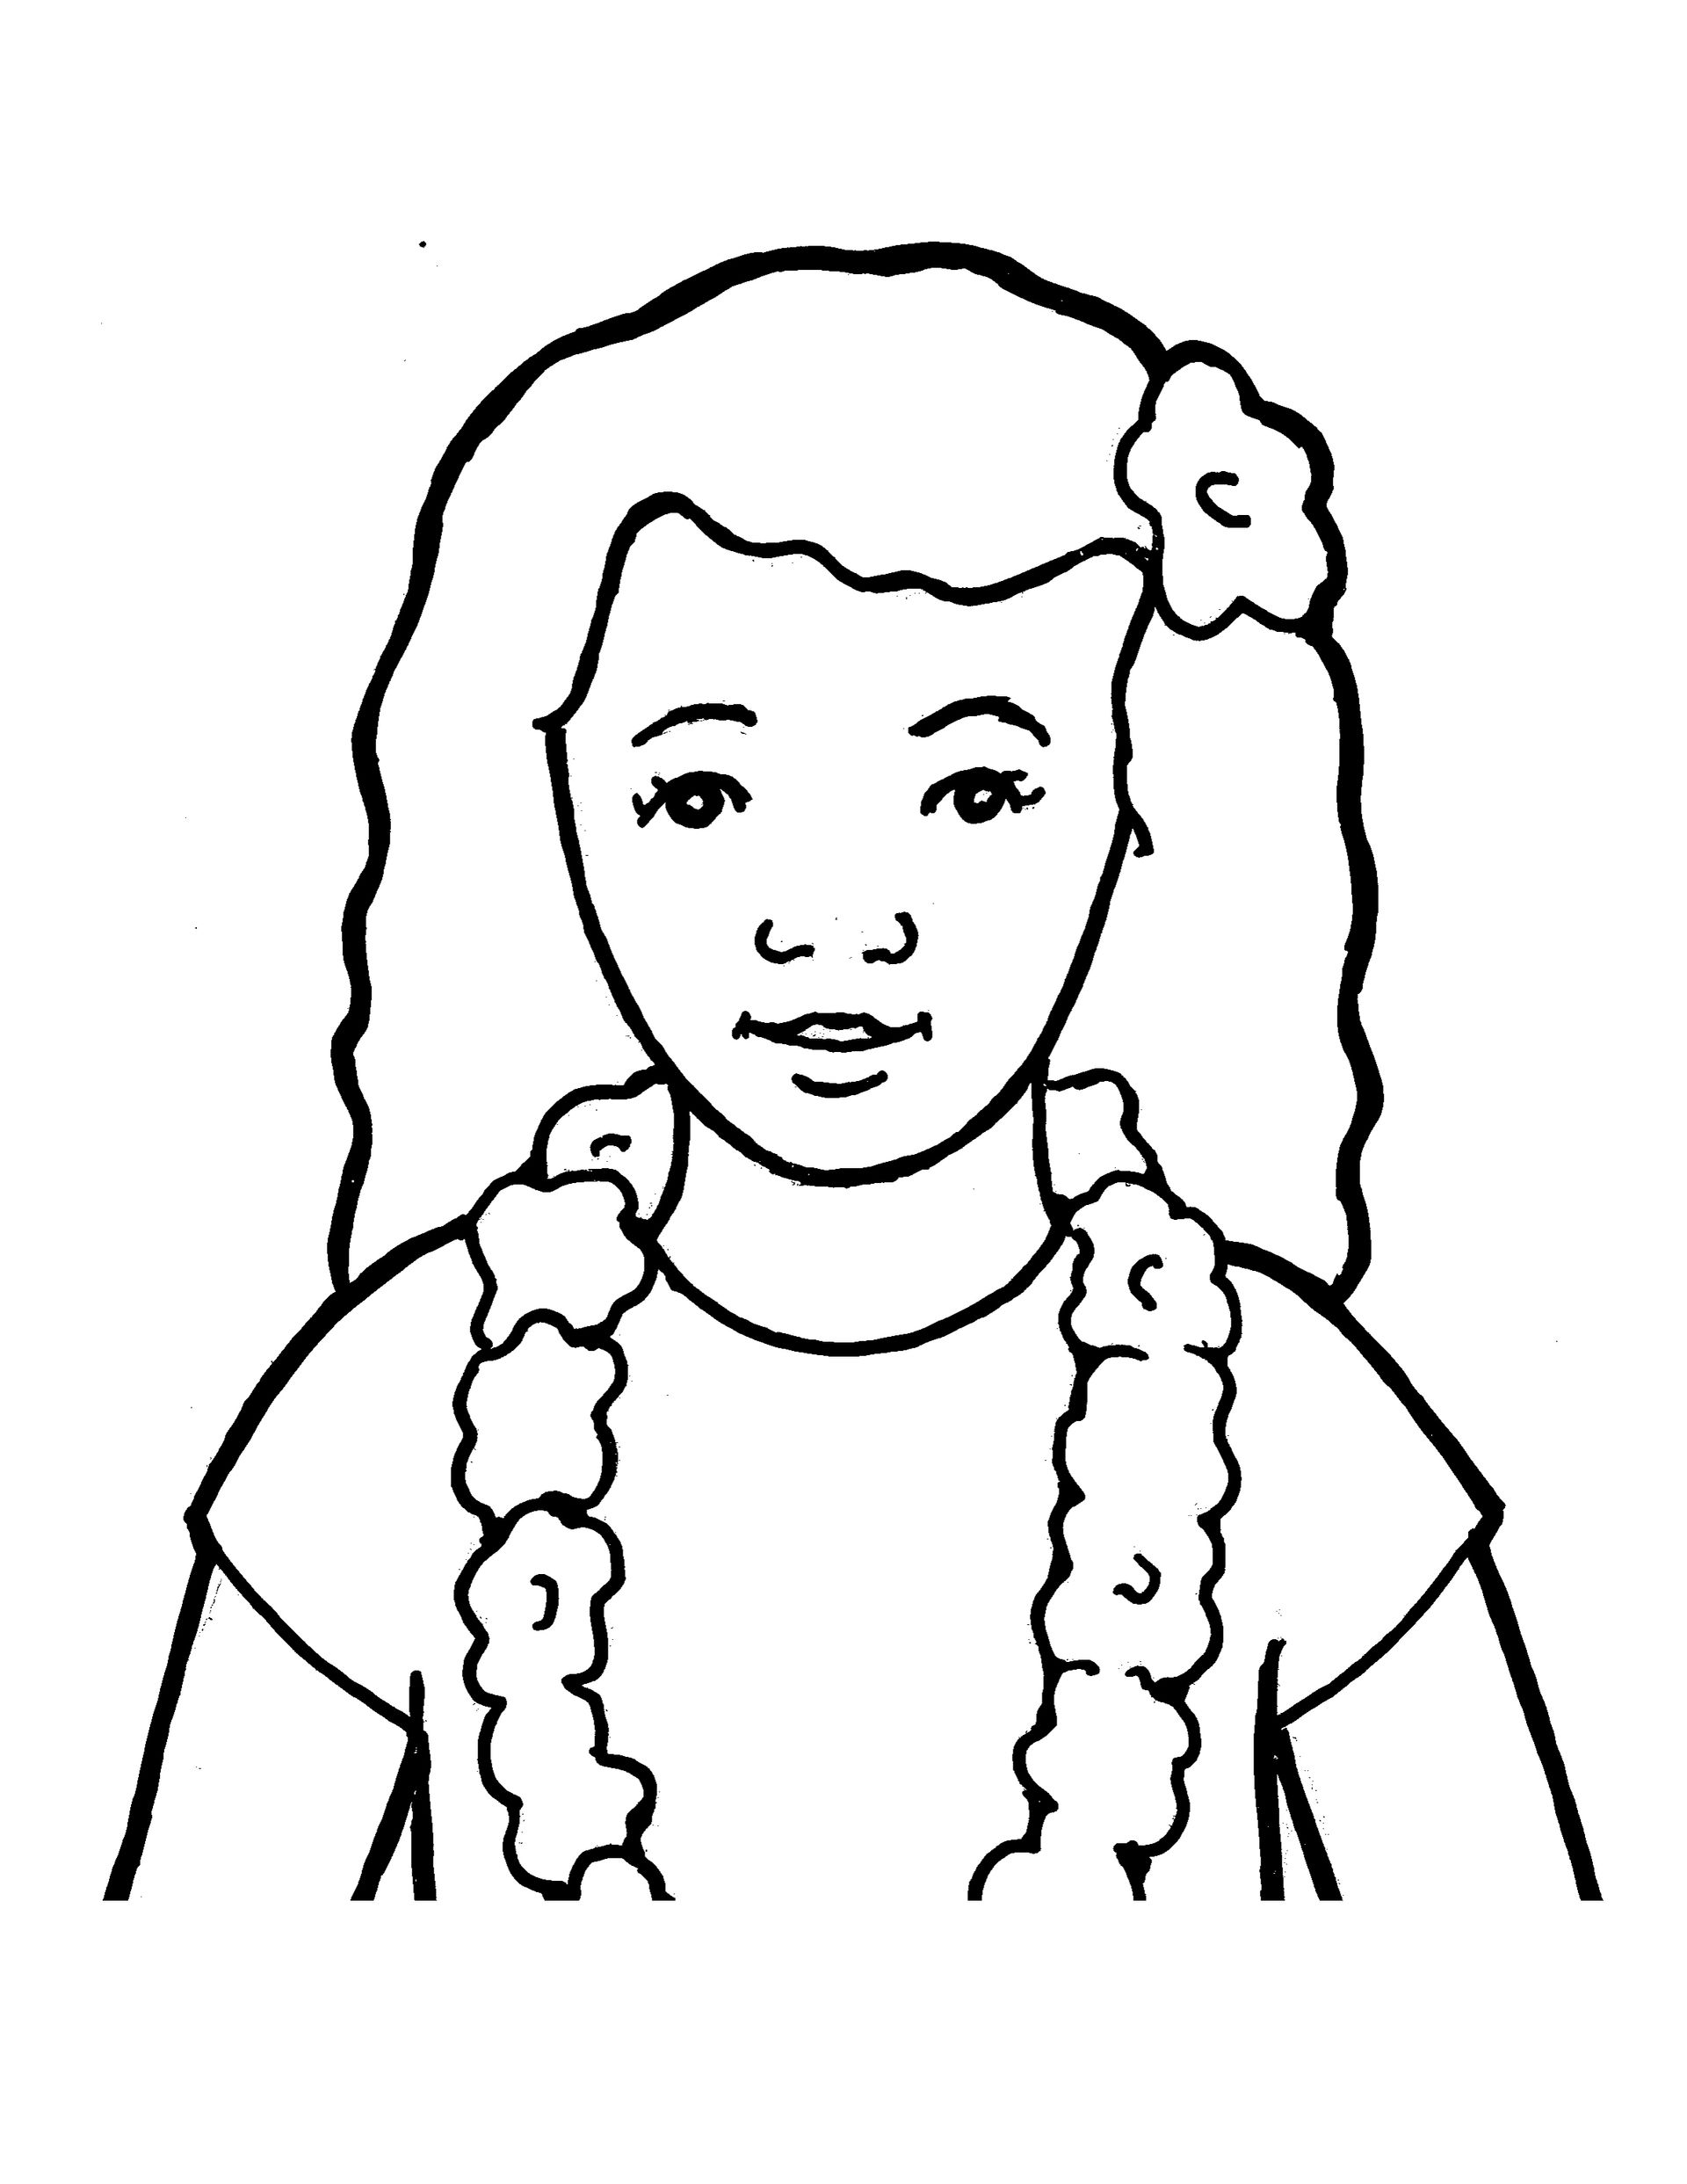 A line drawing of a Primary girl wearing a lei, with a flower in her hair.